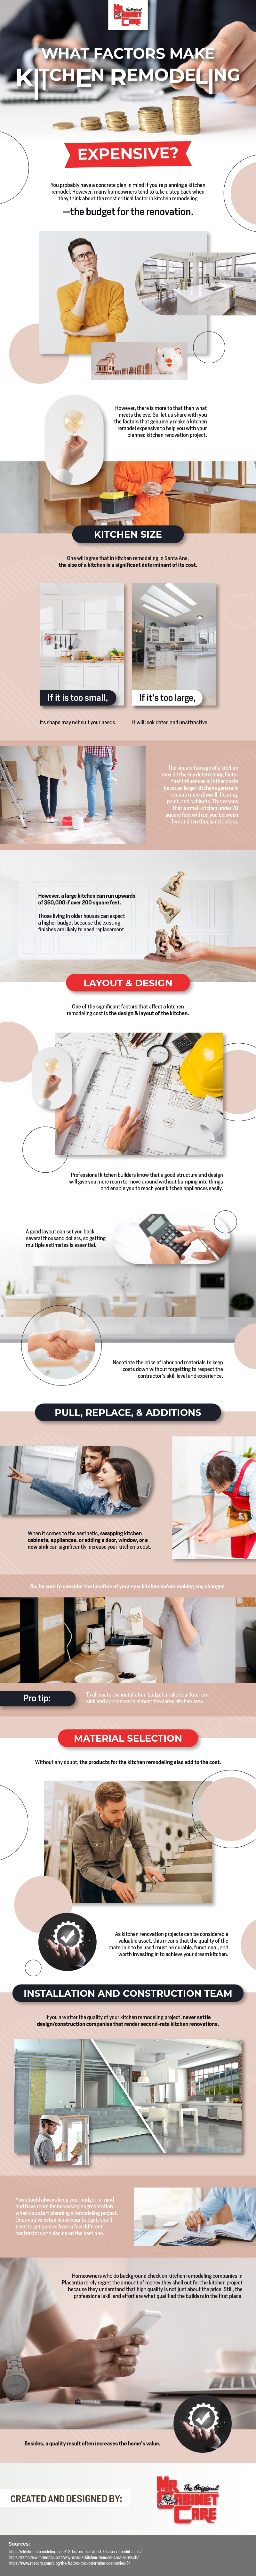 What_Factors_Make_Kitchen_Remodeling_Expensive_infographic_image